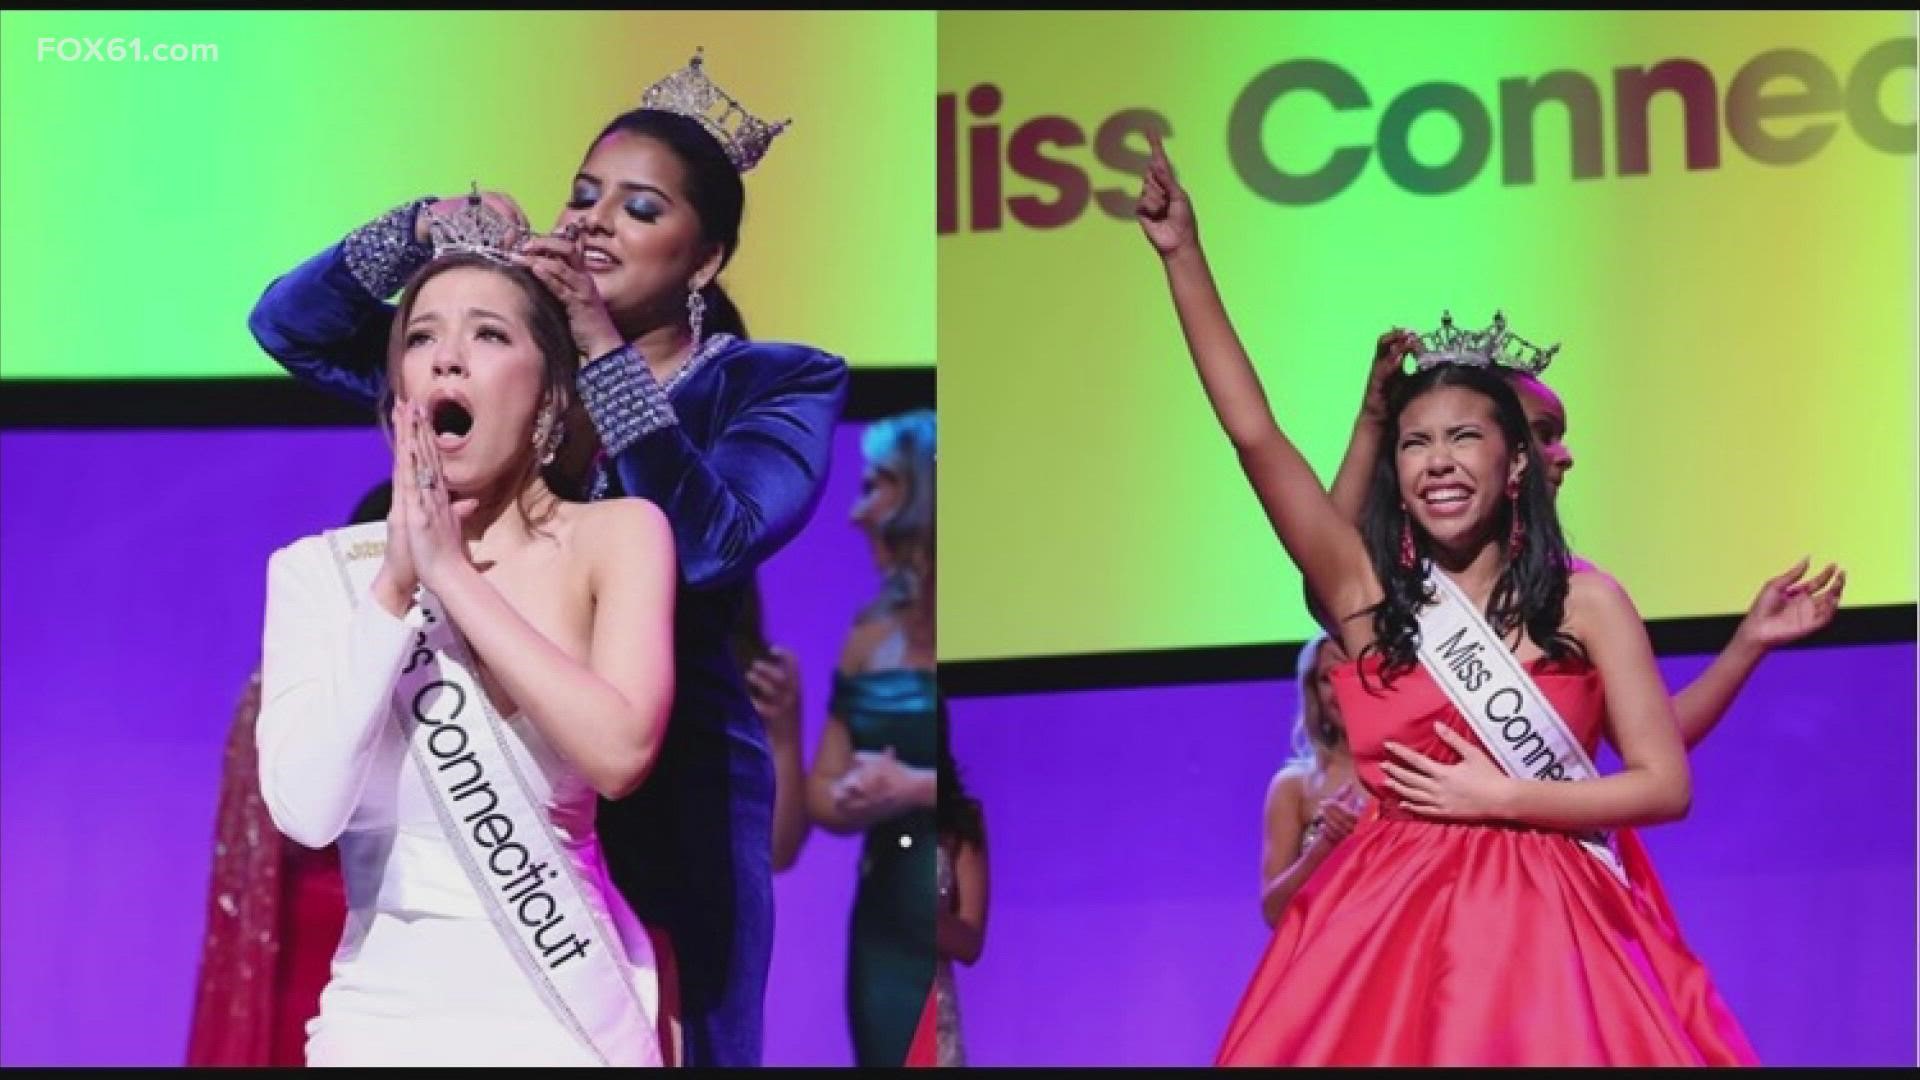 On Saturday, Sylvana Maria González of New Britain was crowned Miss Connecticut 2022 and Peyton Troth of Bristol was named Miss Connecticut’s Outstanding Teen 2022